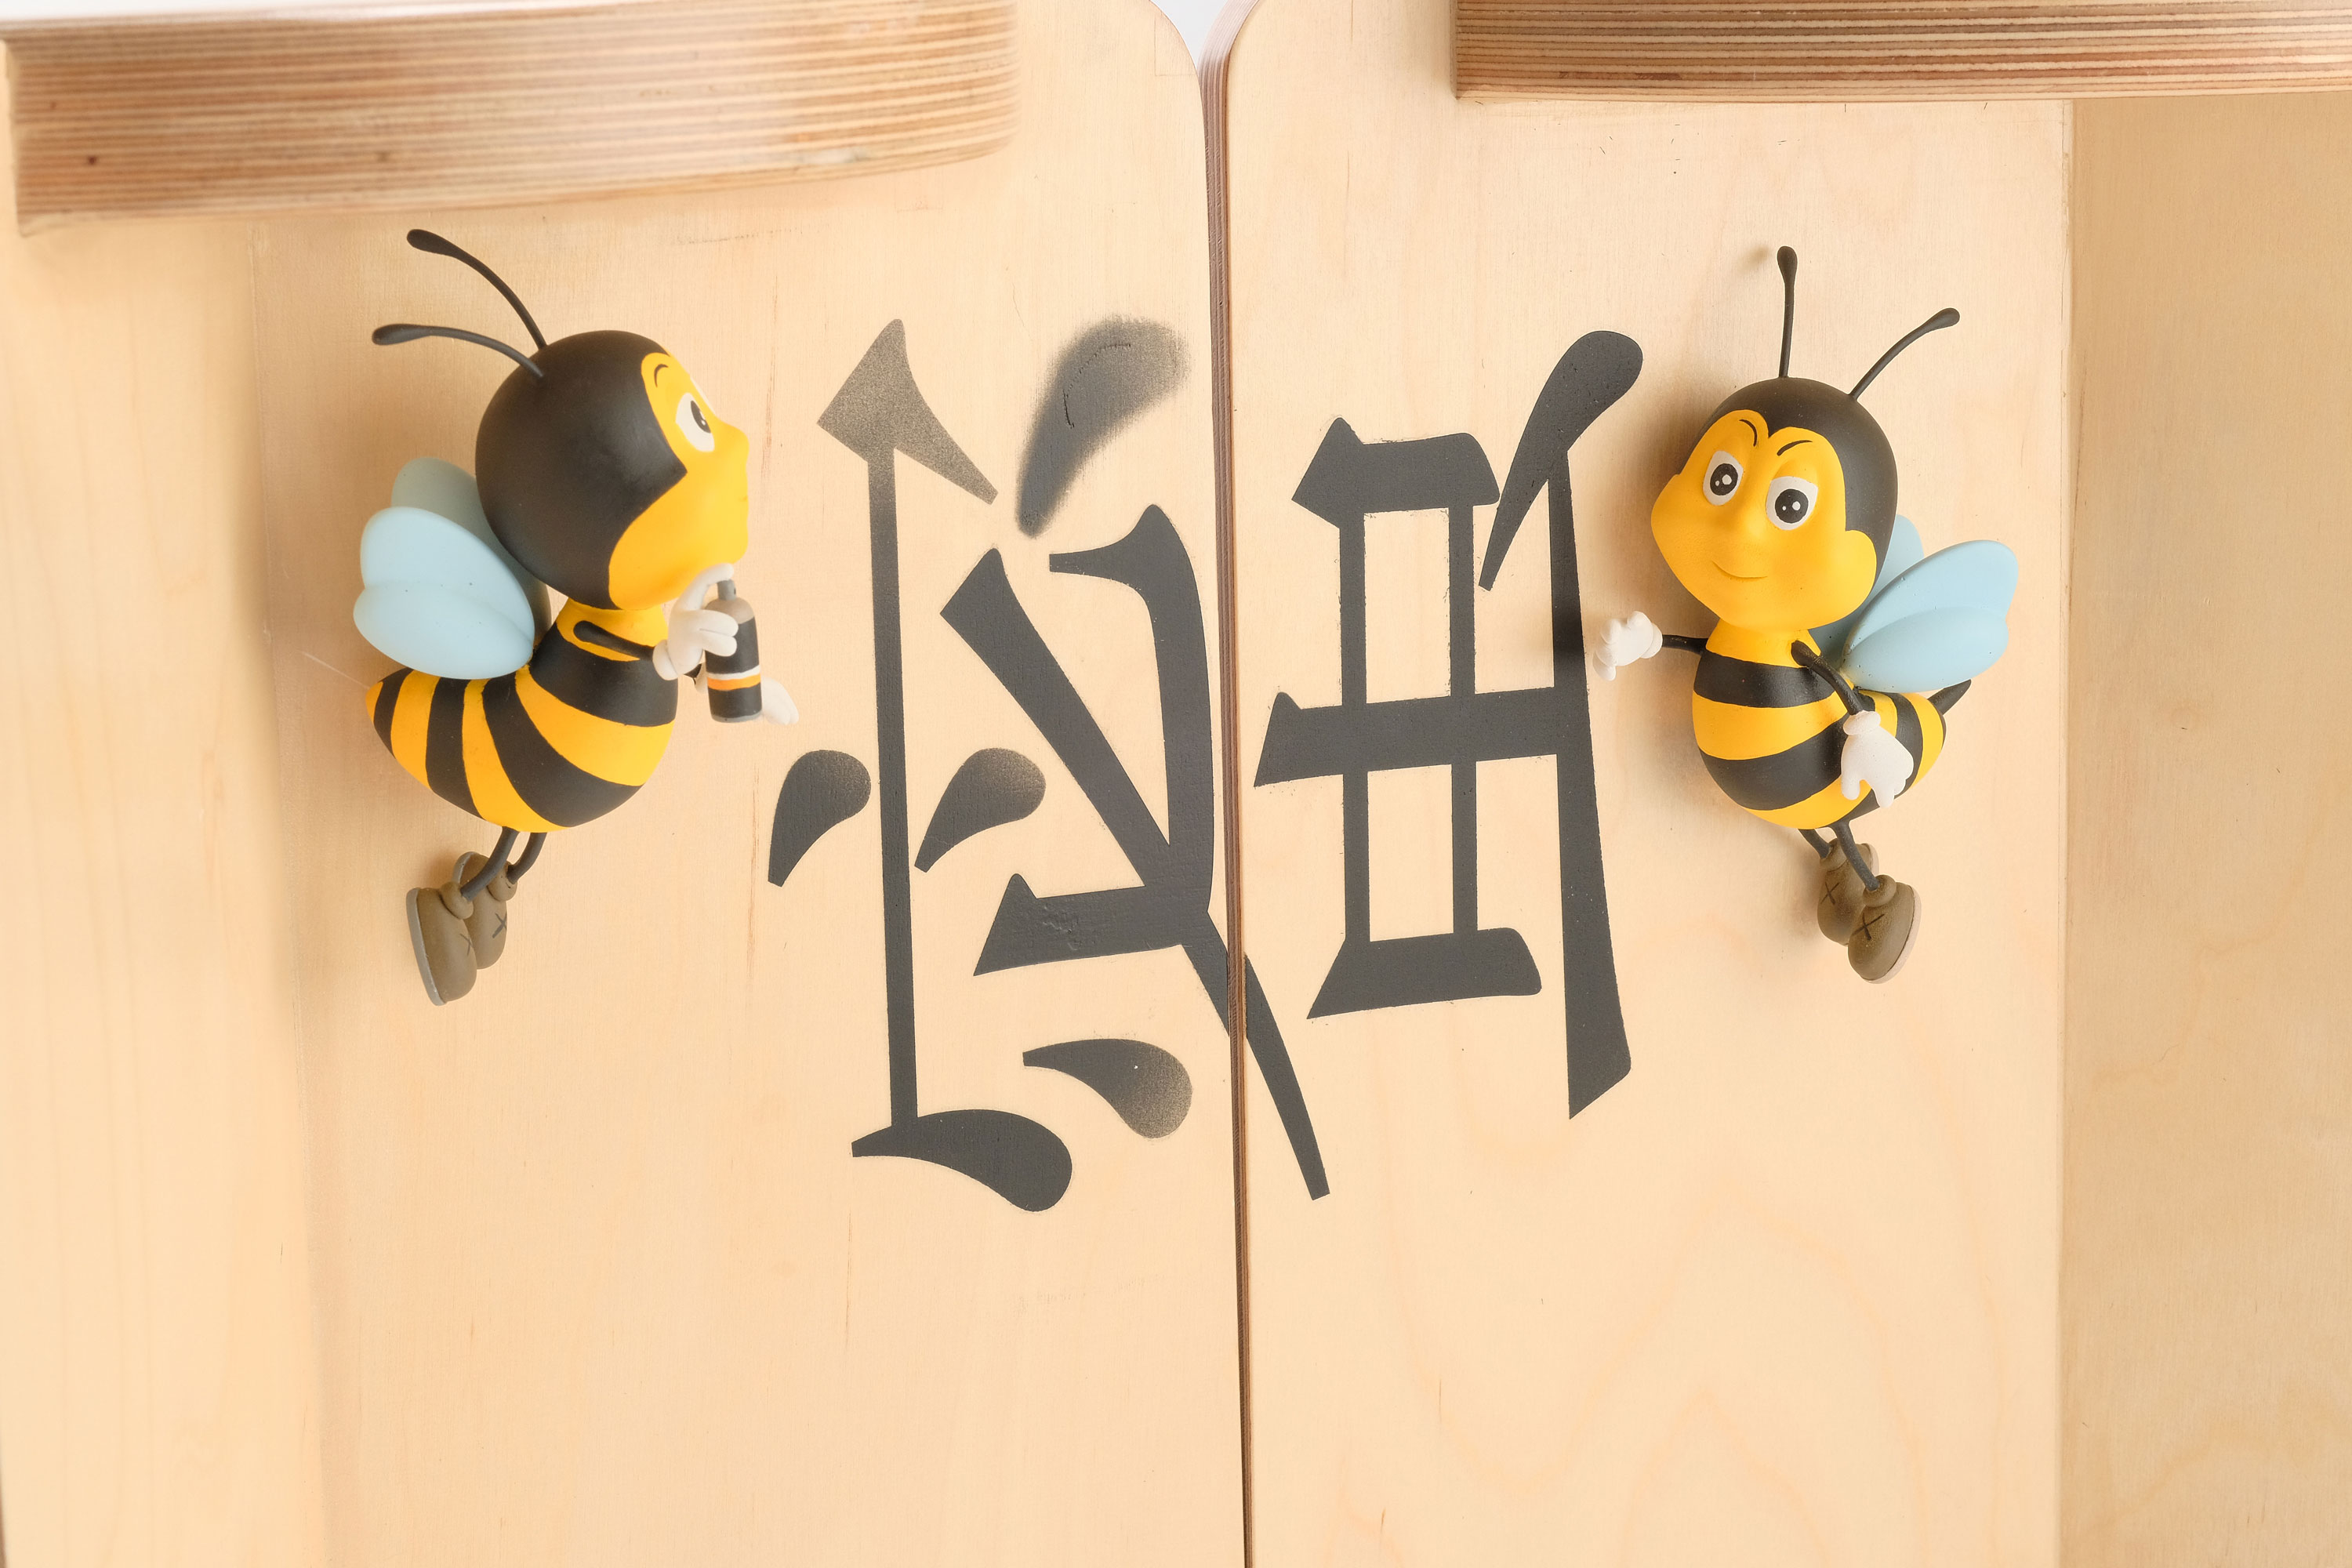 Bee It Work Or Play, Teaming Up Is A Better Way. 一只蜂酿不成蜜。by Lush Tan, William Sim